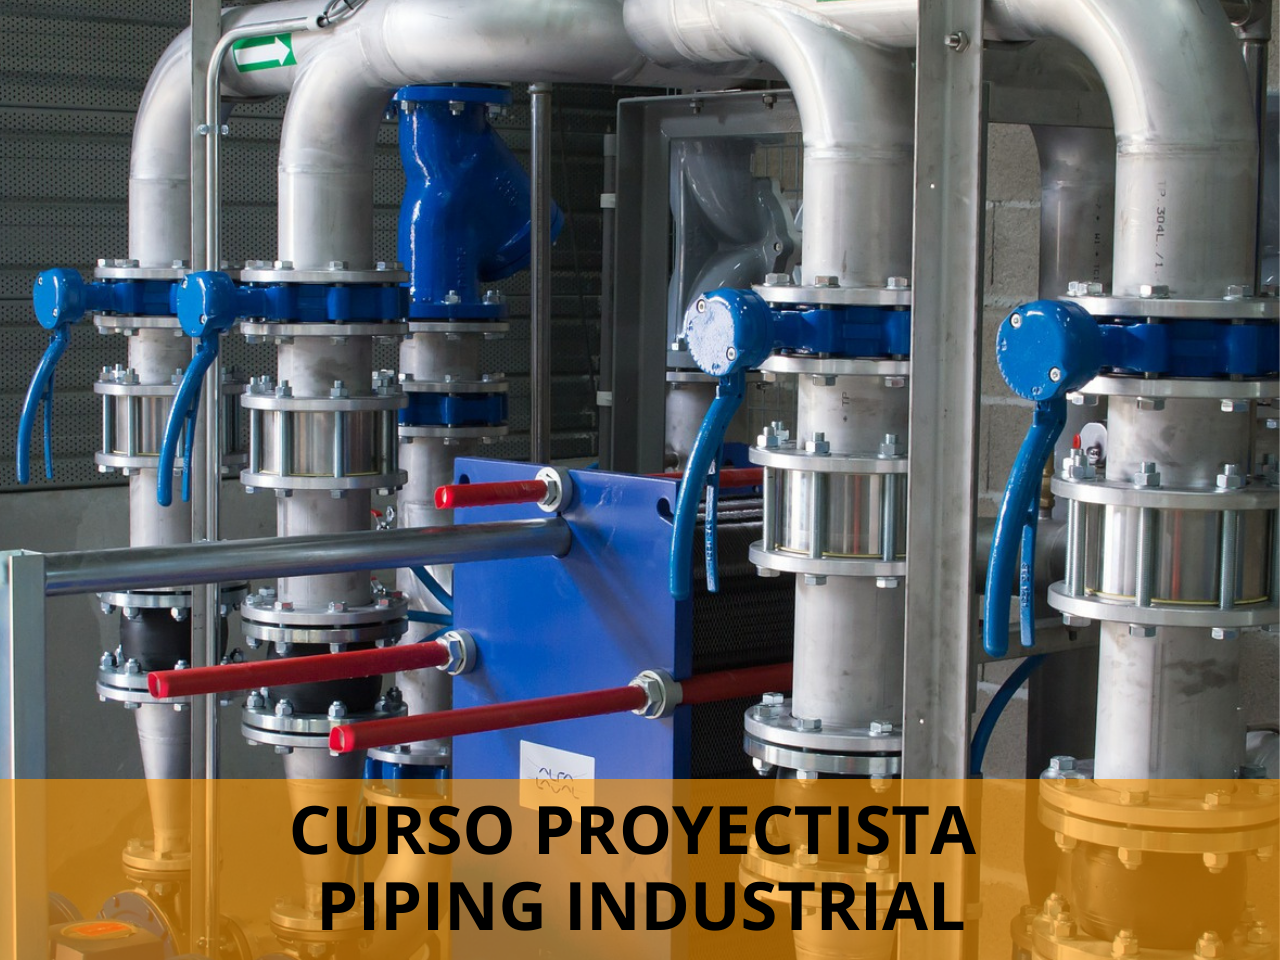 Curso Proyectista Piping Industrial